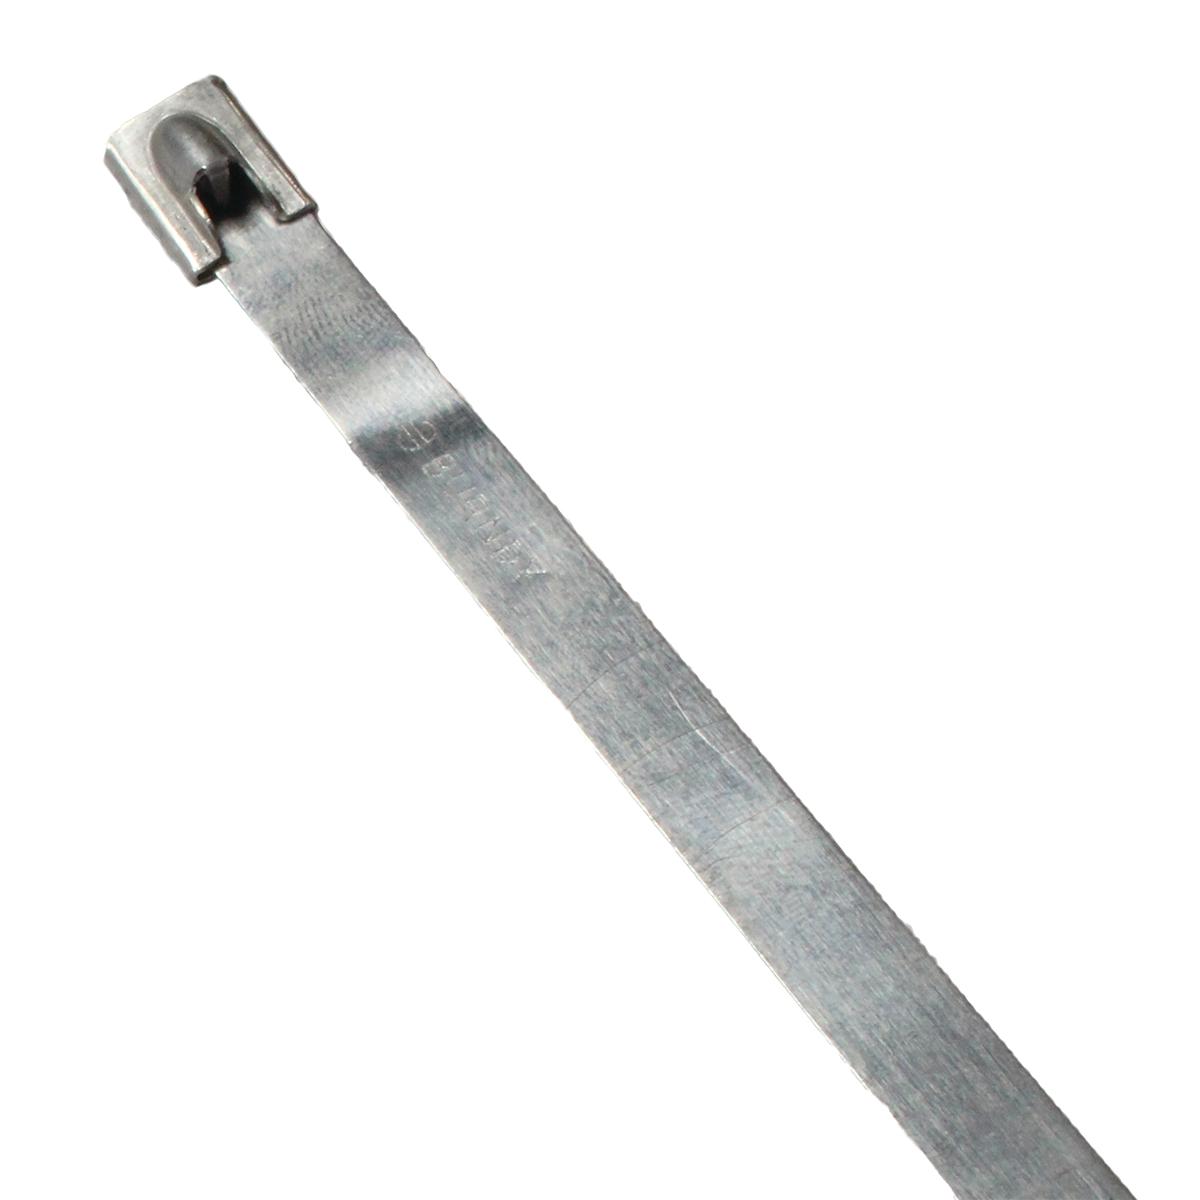 Hubbell CTSS500600316L Uncoated stainless steel cable ties 316 grade, Tensile strength: 500 Lb, 23.62" L, 0.31" W, 6.07" Bundle Dia.  ; Smooth, rounded edges help ensure safe, efficient handling ; Ergonomically designed installation tools consistently tensions and cuts off ties